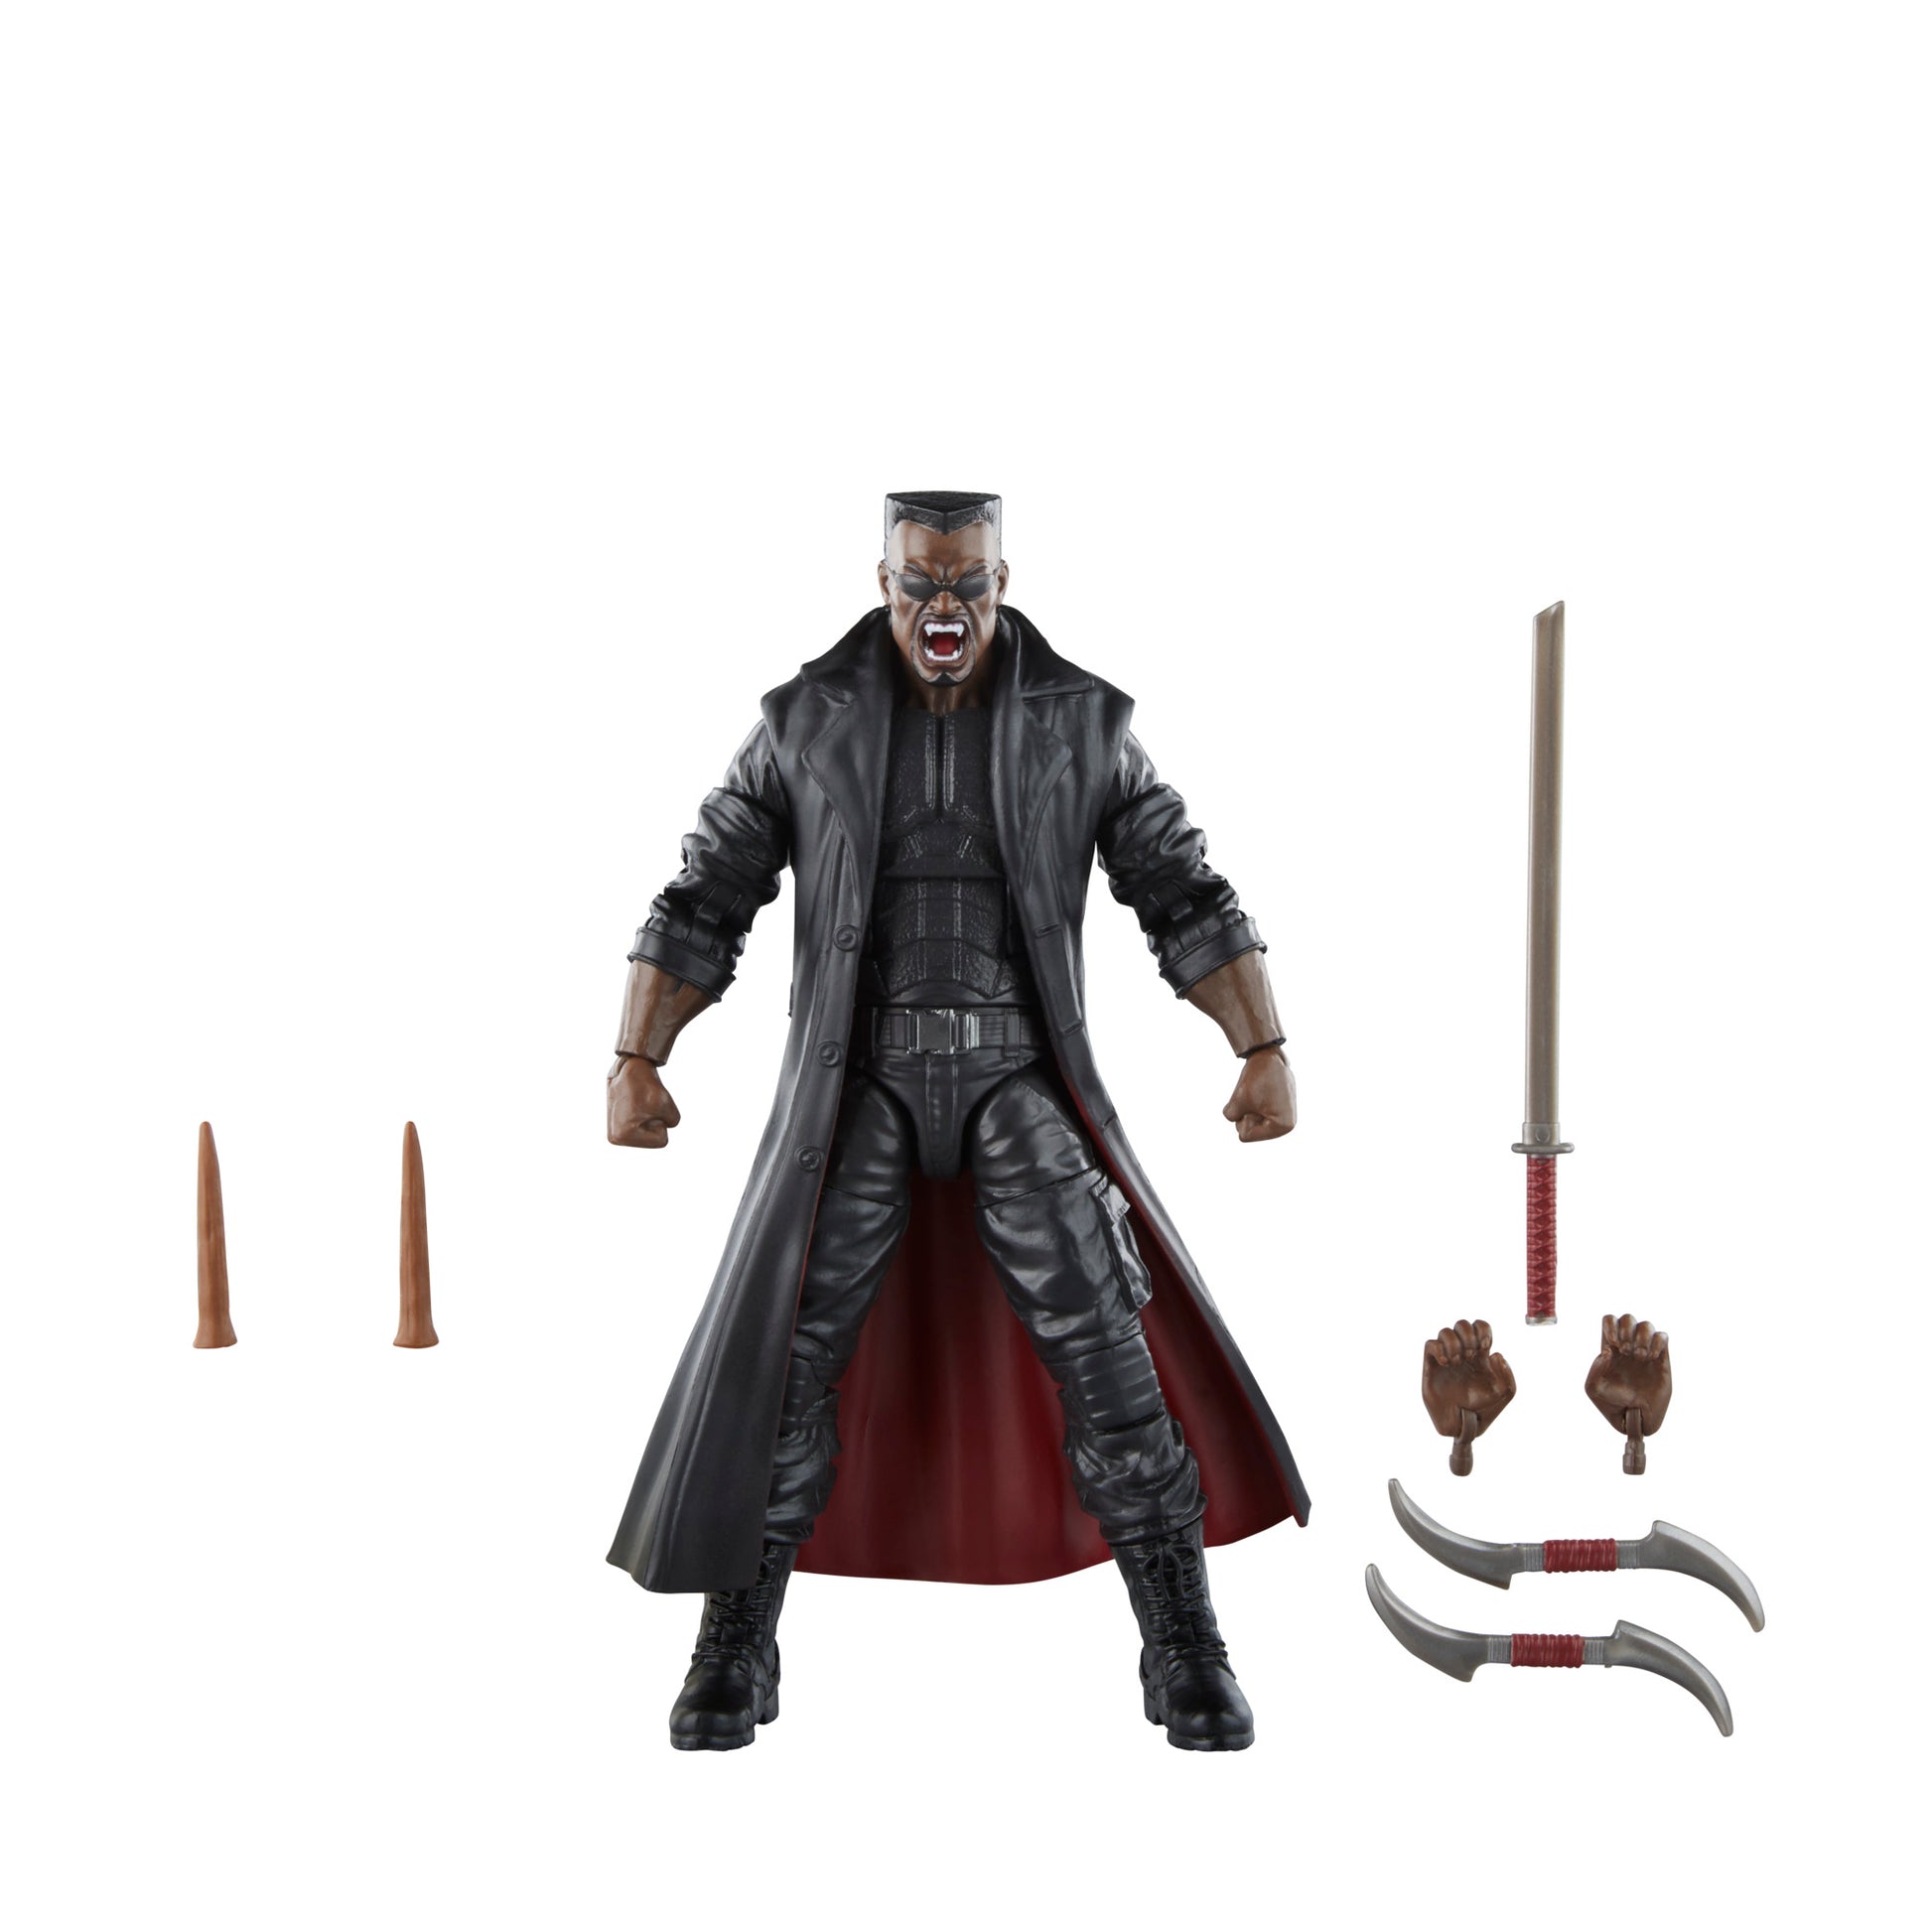 Hasbro Marvel Legends Series Marvel's Blade Action Figure Toy with accessories - Heretoserveyou